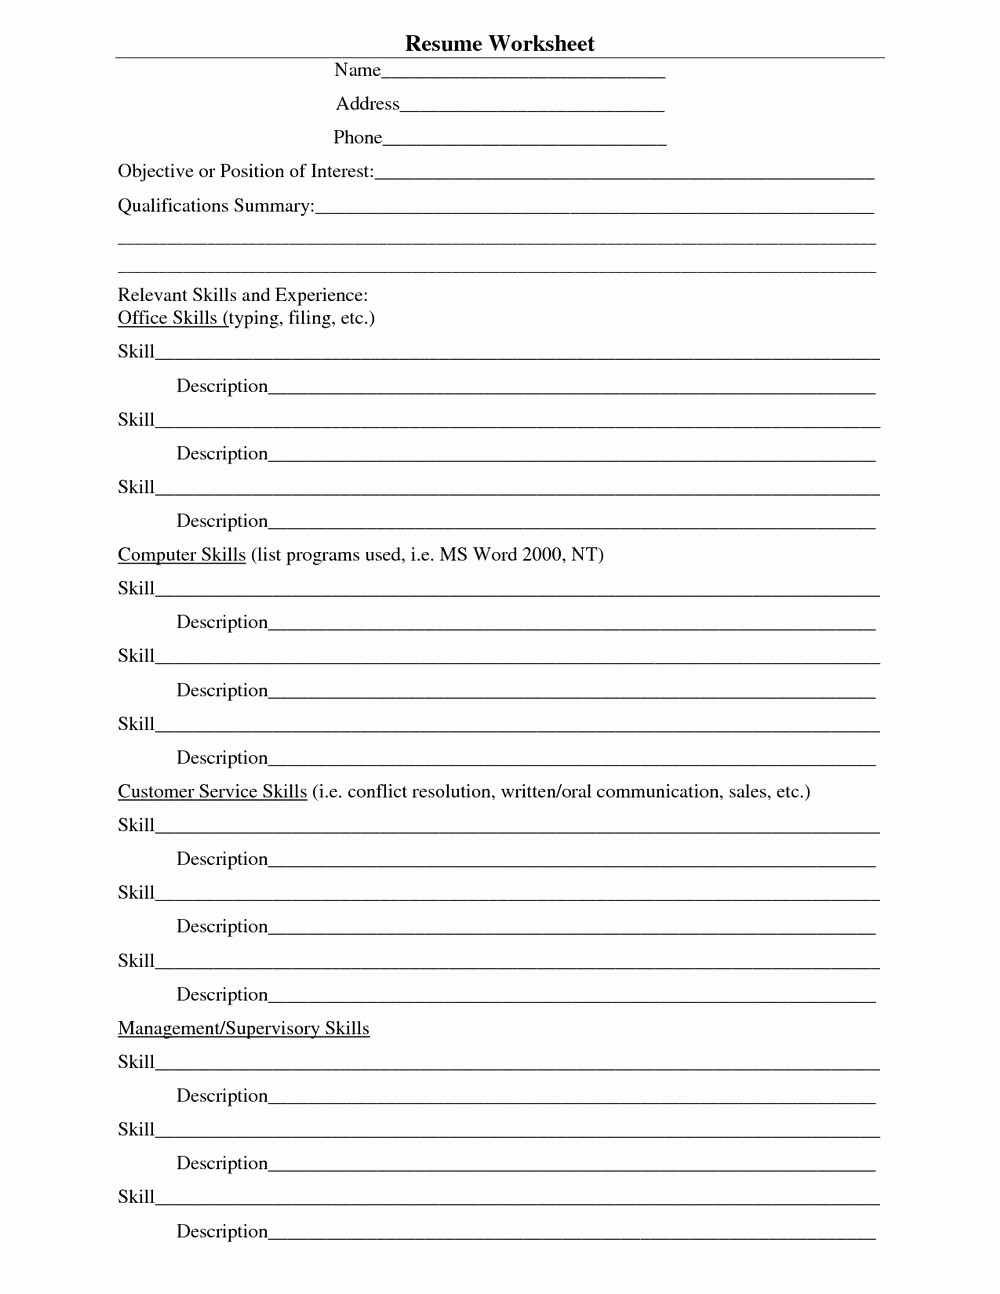 Resumes Fill In the Blanks Inspirational Blank Resume Template Pdf Resumes 227